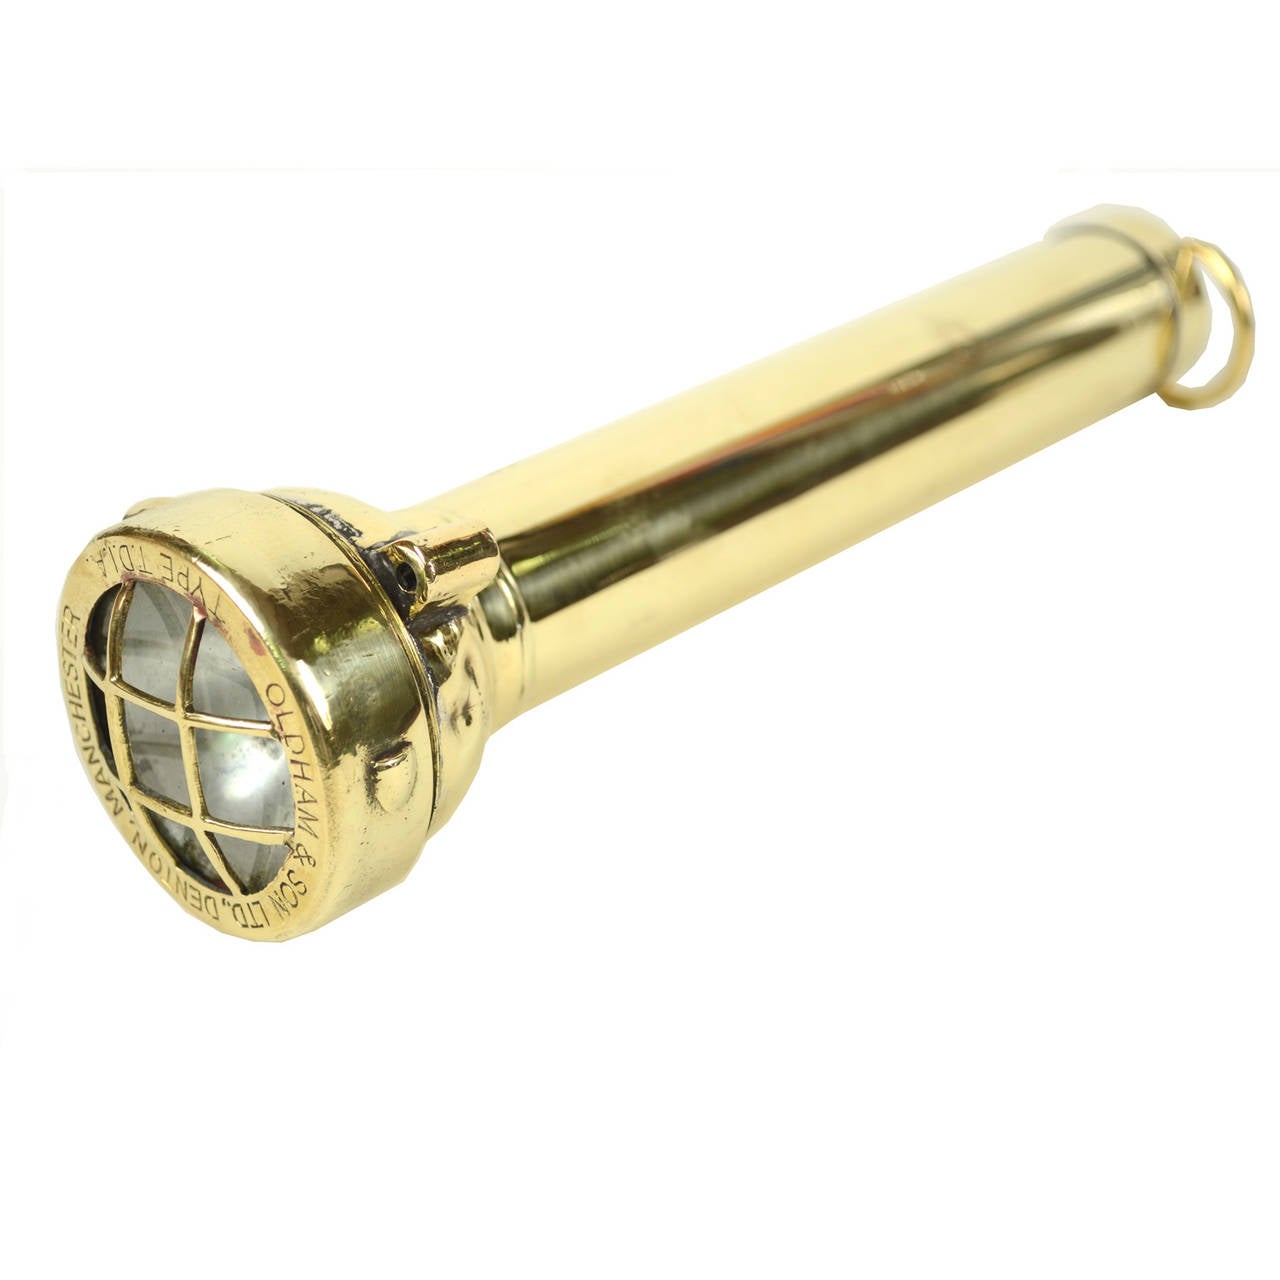 Brass nautical flashlight signed Oldham & Son Ltd Denton Manchester type T.D.I.A. Length cm 25 - inches 9.84. Not working, but very nice decorative object.

Oldham and Son was founded in 1865 as a general engineering firm in Denton, Manchester,